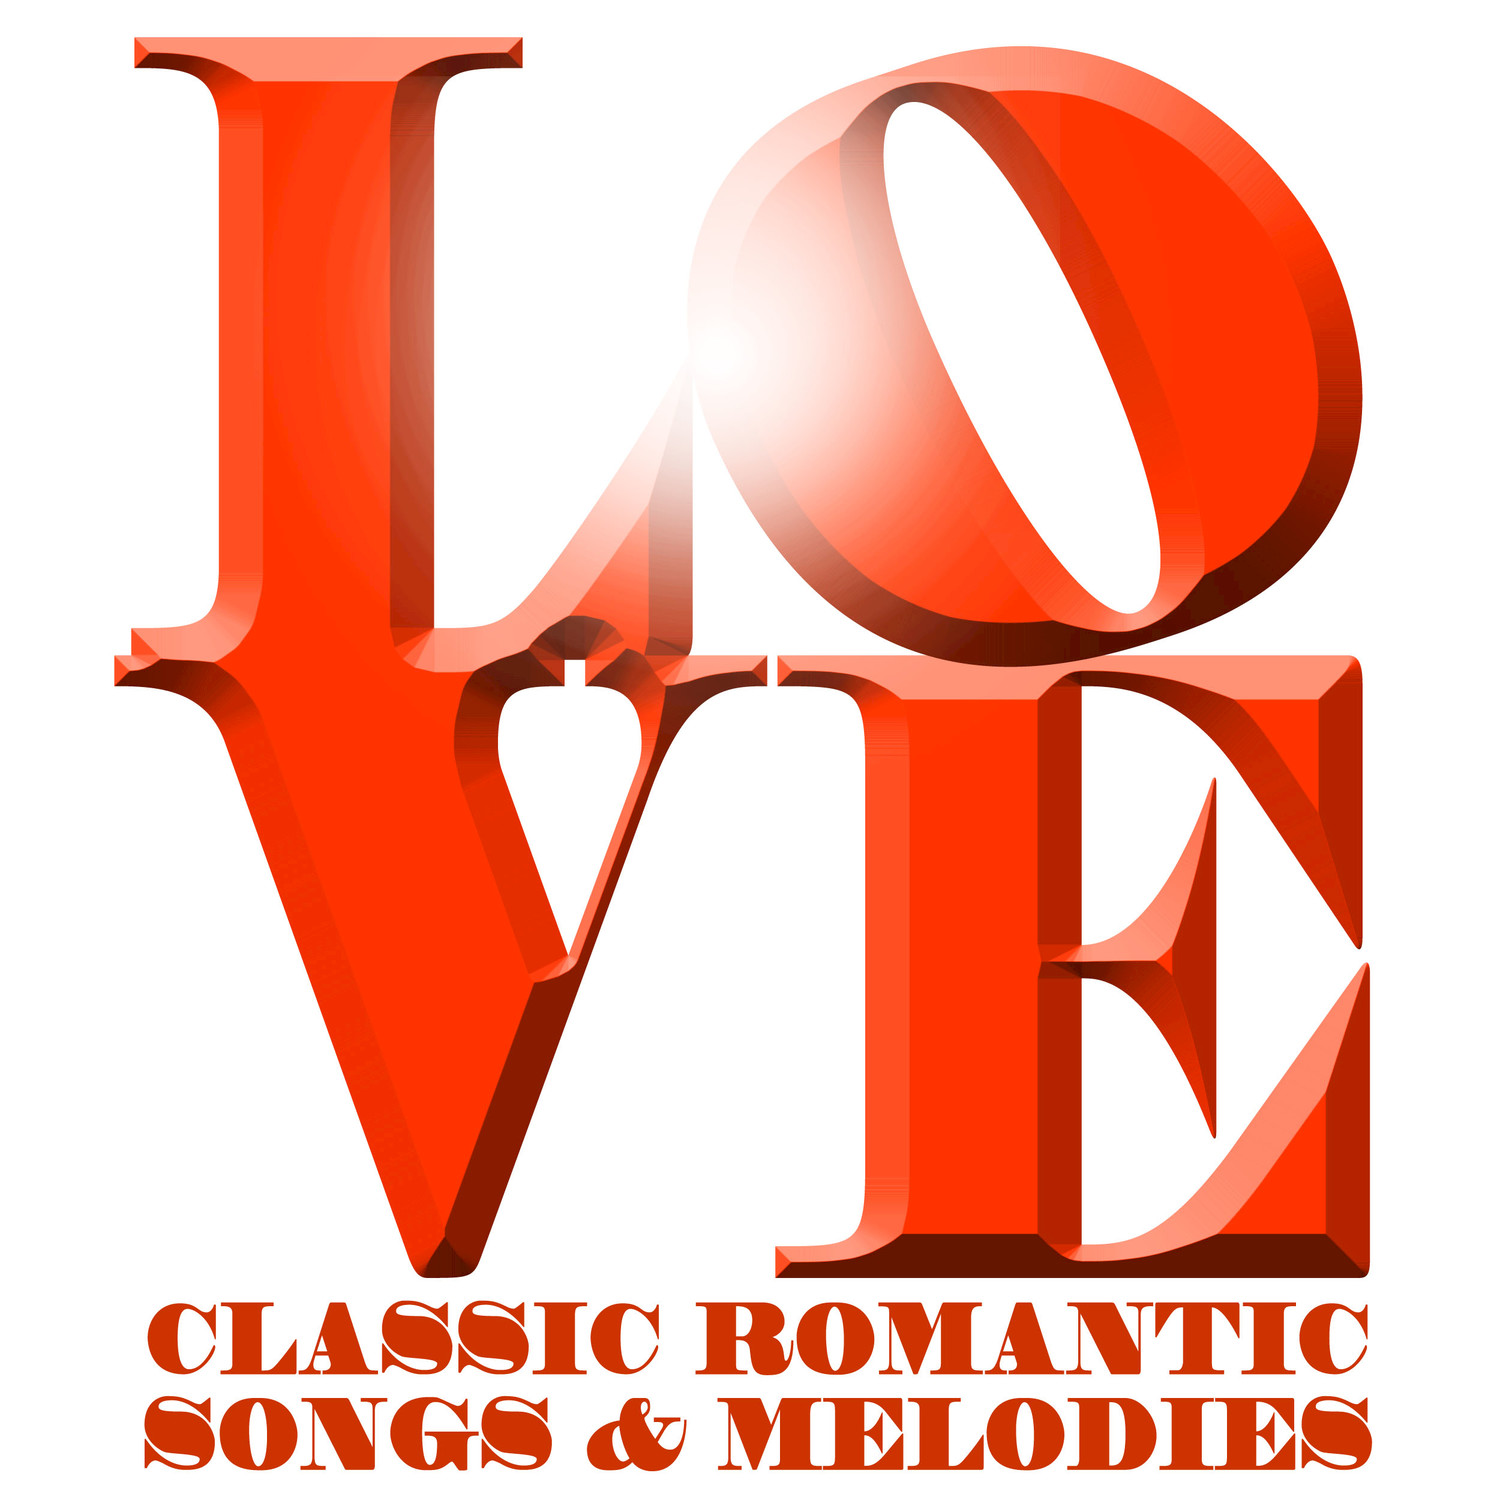 Love Classic Romantic Songs & Melodies